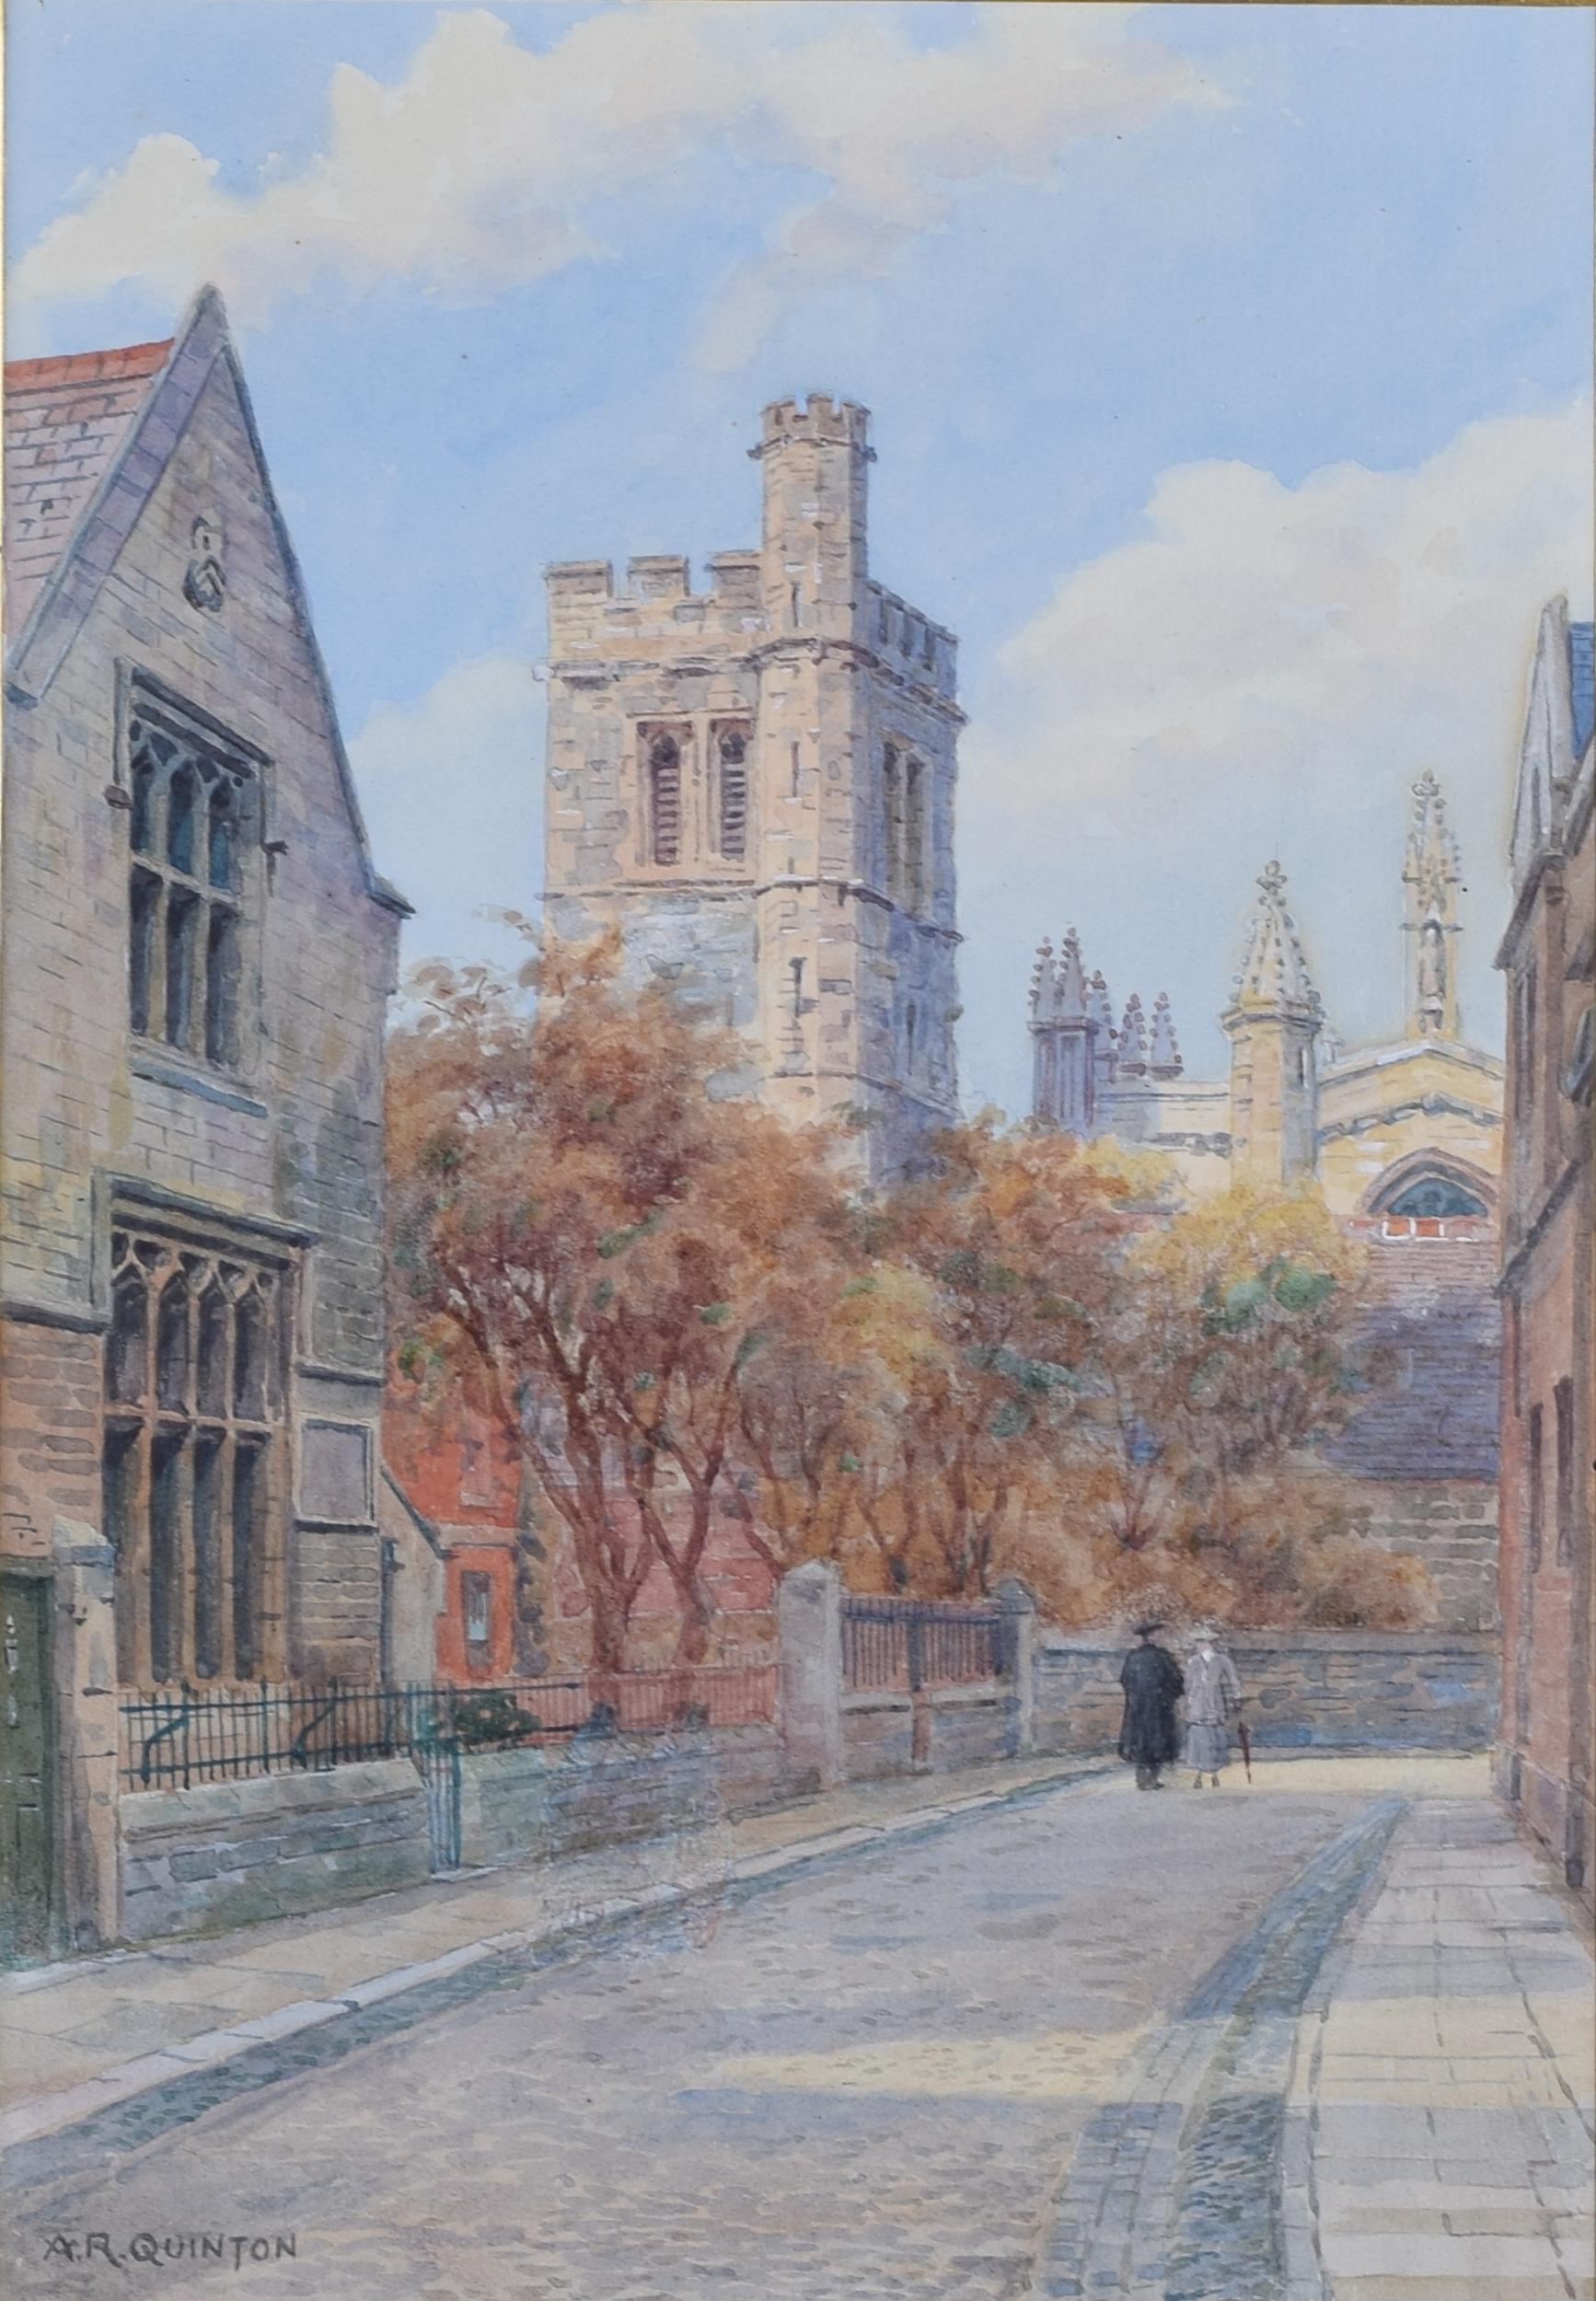 A R Quinton (1853-1934) – Alfred Robert Quinton
New College Bell Tower, Oxford
Signed lower left
Watercolour
25x17cm

Between 1904 and his death over 2000 of Quinton’s paintings were published. Well known for his paintings of landscapes and